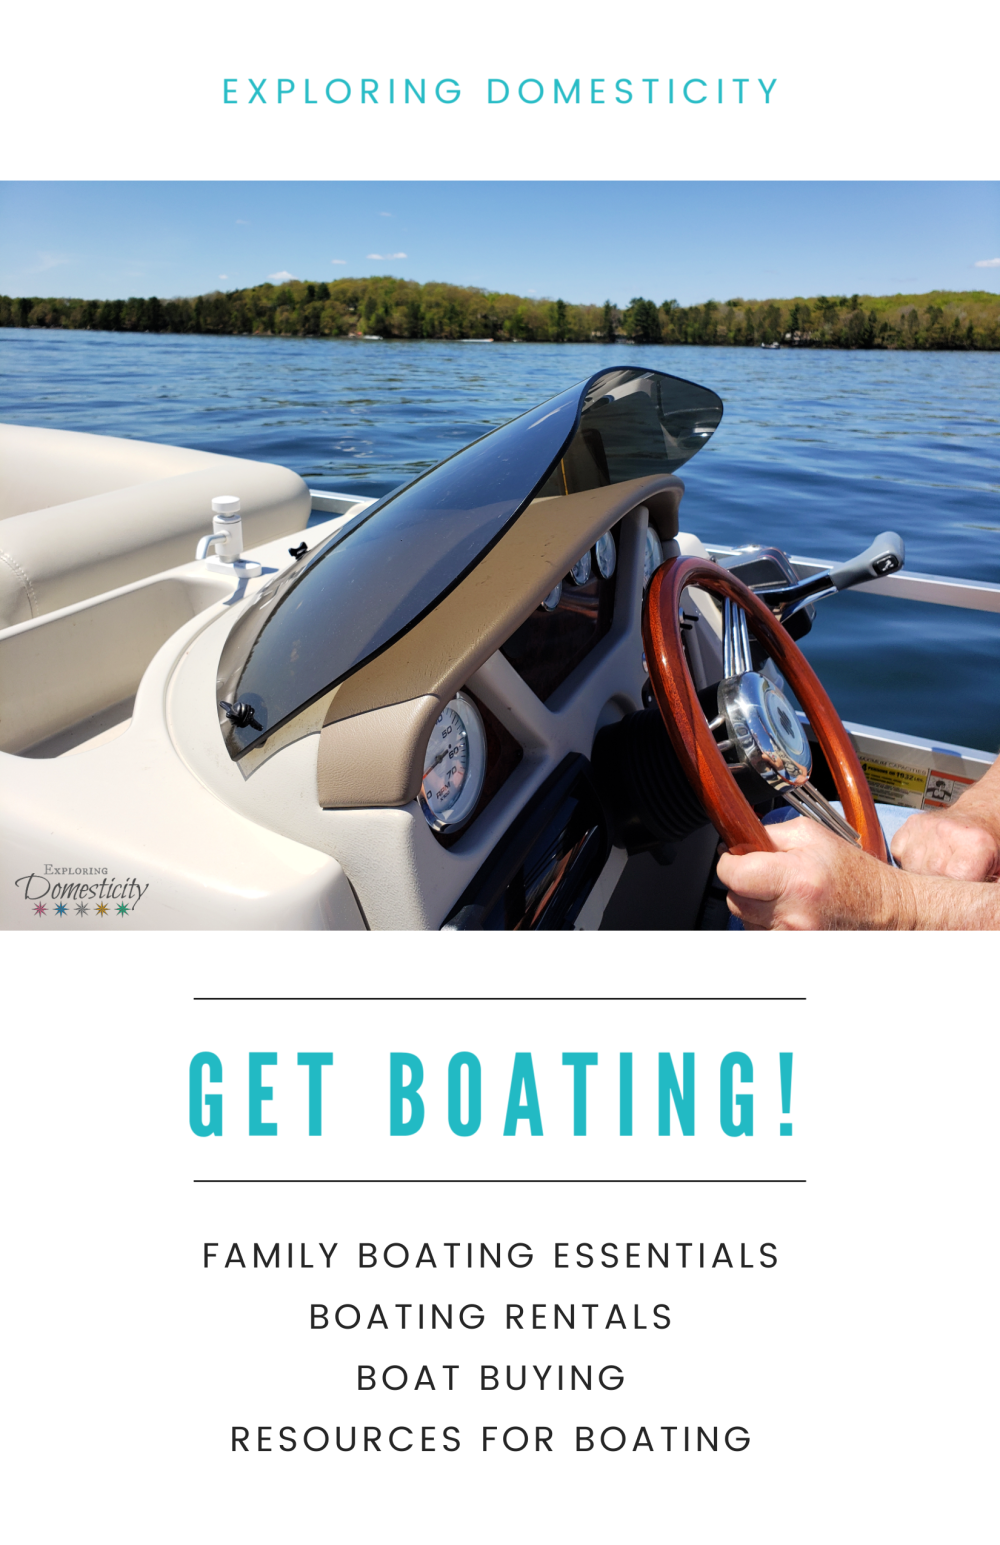 https://exploringdomesticity.com/wp-content/uploads/2019/06/Get-Boating-Boat-Rentals-by-zipcode-boat-buying-and-resources-for-boating.png